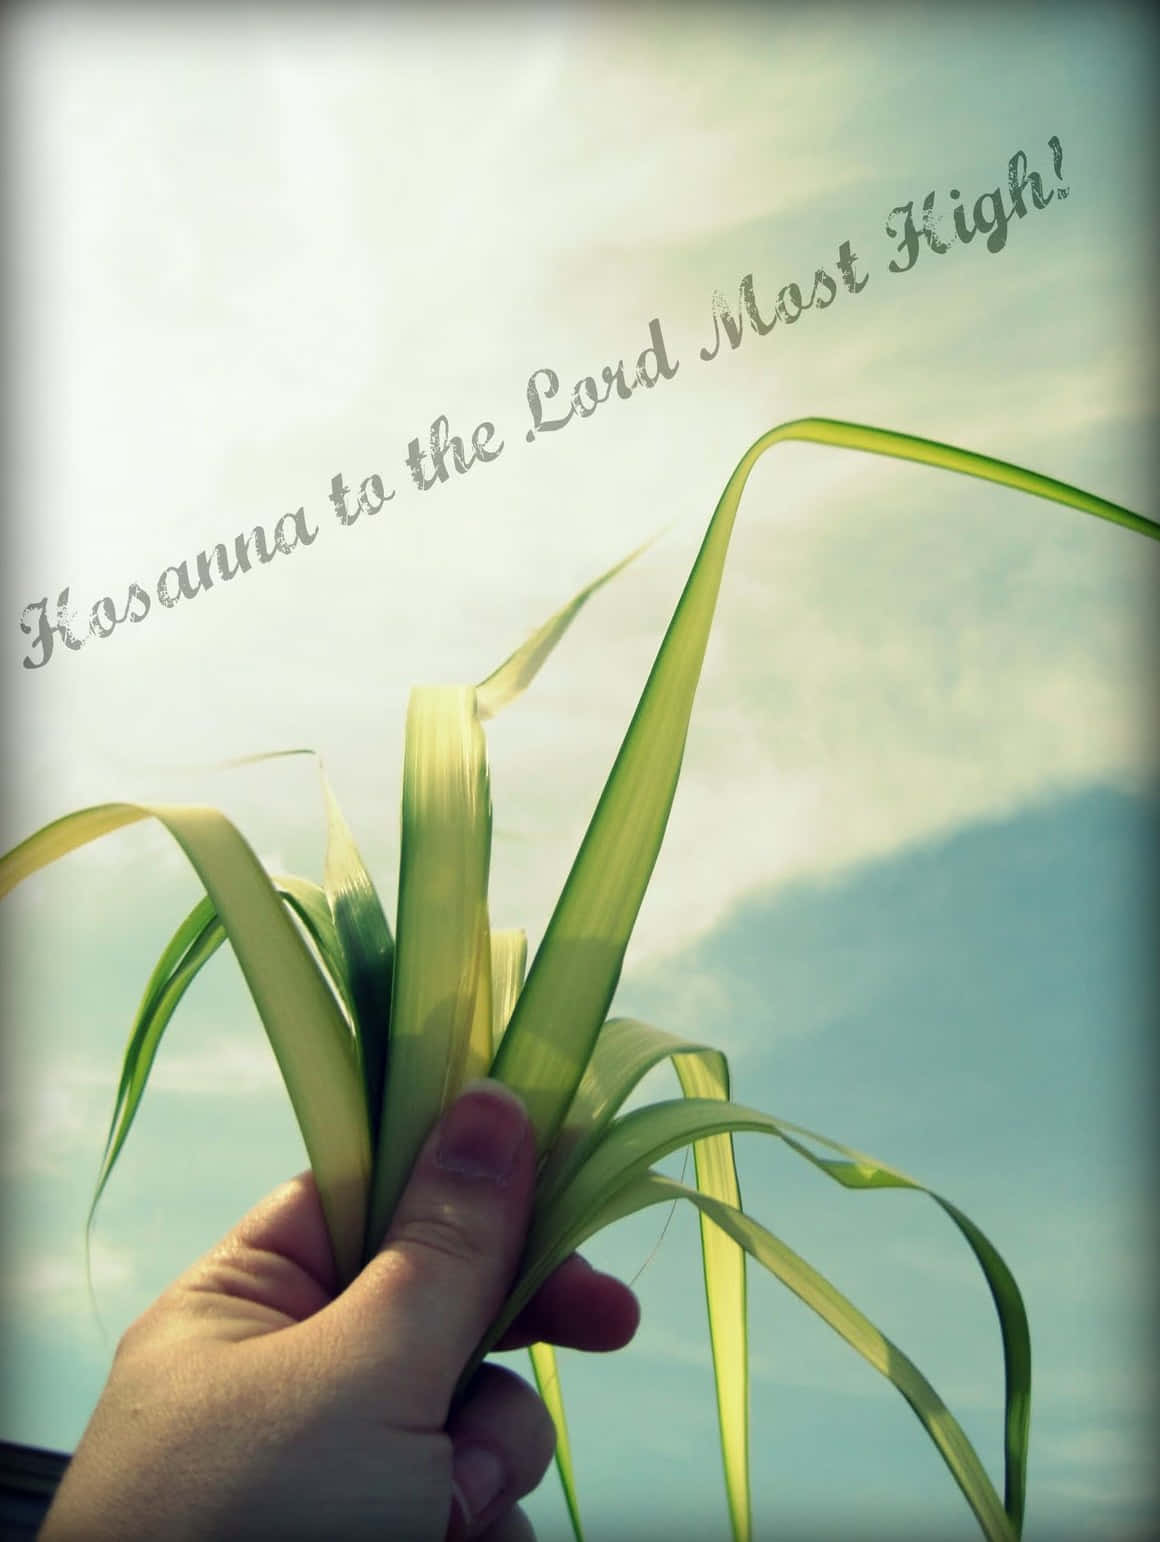 Freedom Palm Sunday Picture